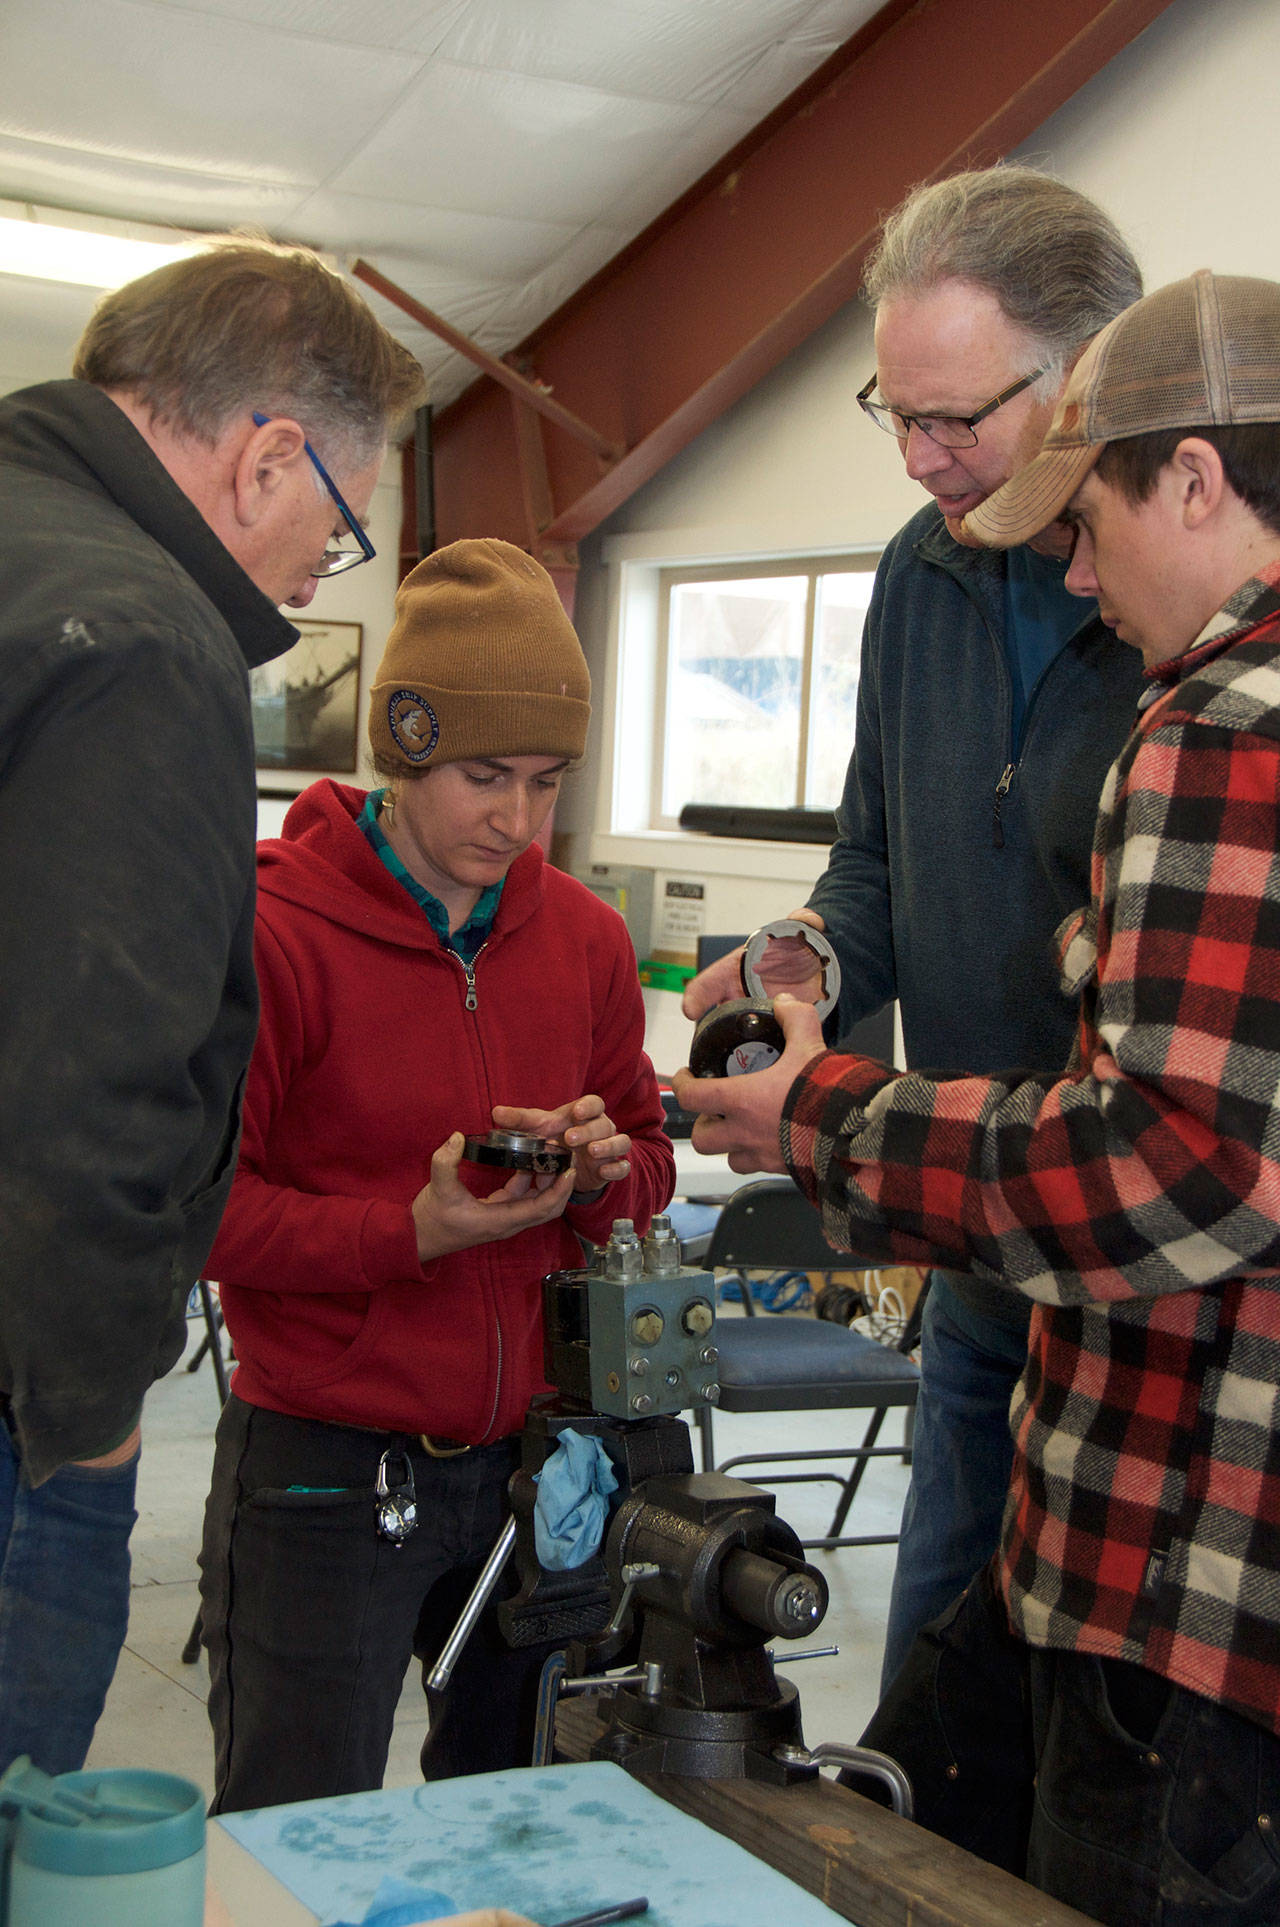 As part of the Marine Hydraulics Intensive at the Northwest School of Wooden Boatbuilding in Port Hadlock, instructor Walt Trisdale looks on as students examine parts of a disassembled hydraulic motor. (Elizabeth Becker)